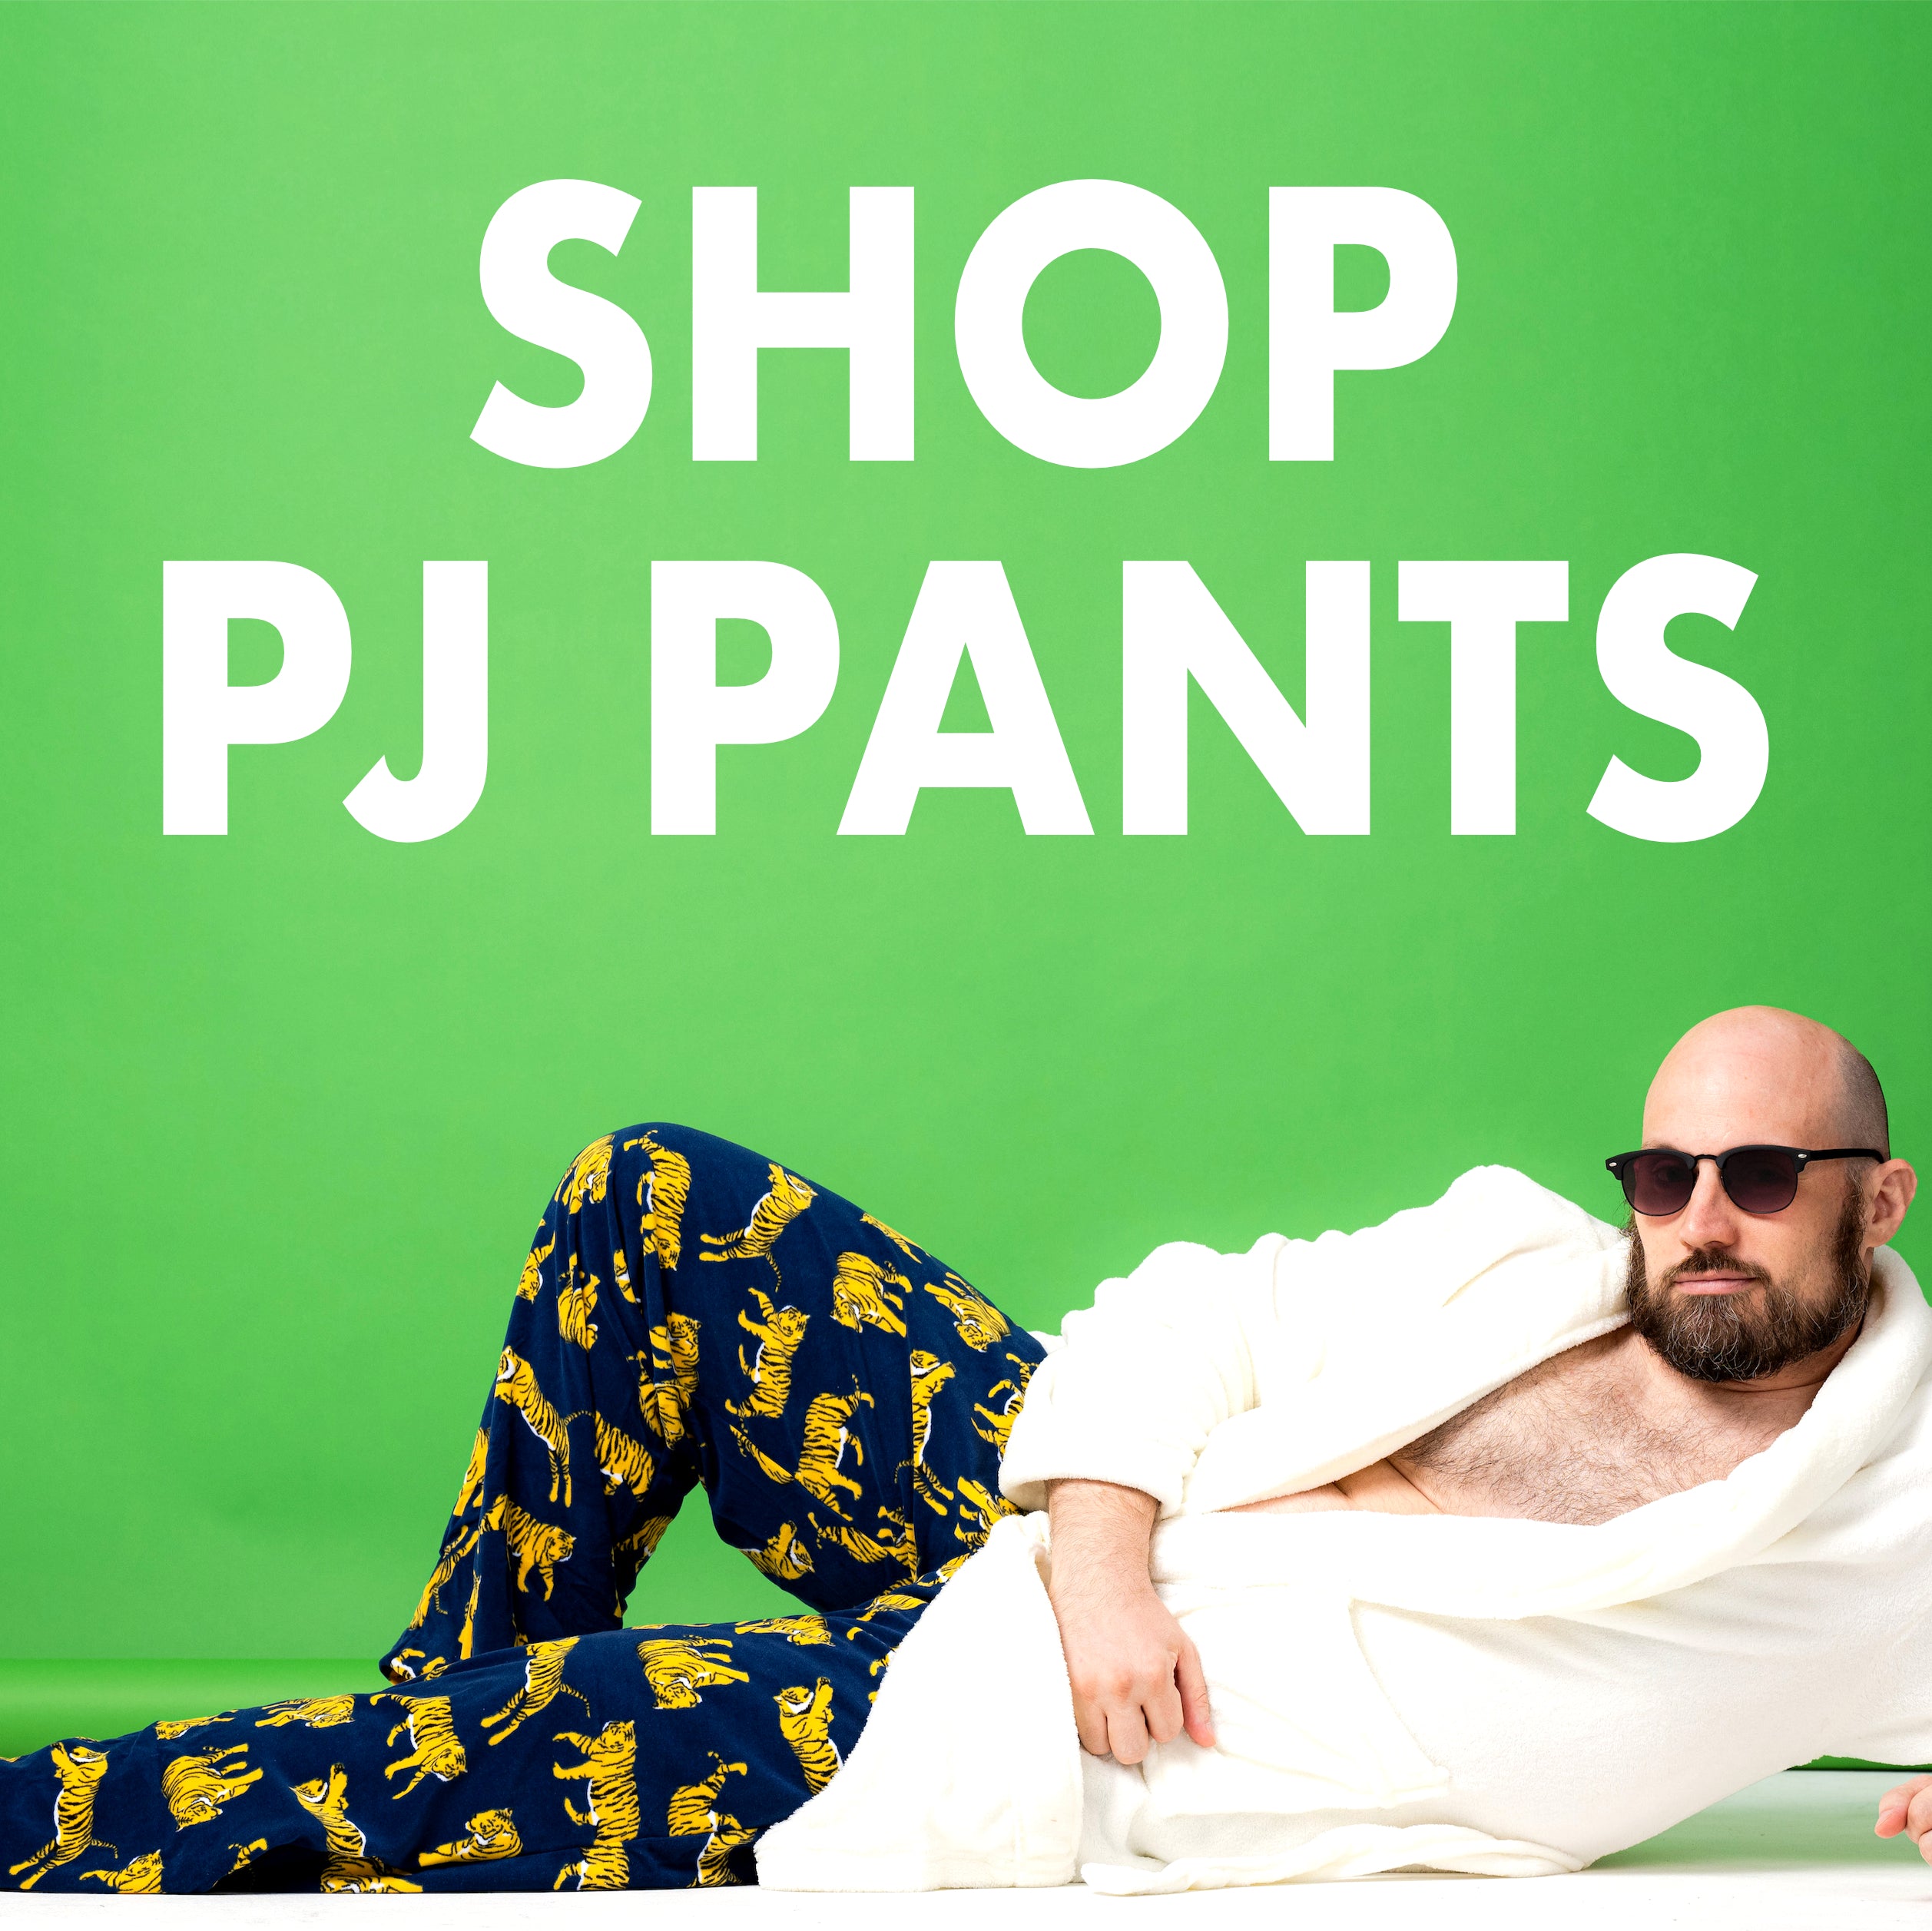 Nothing's more important than getting a good night's rest, and you deserve the comfiest, most stylish pajama pants to chill in. So go ahead and upgrade those old sweats and college tees you've been wearing.